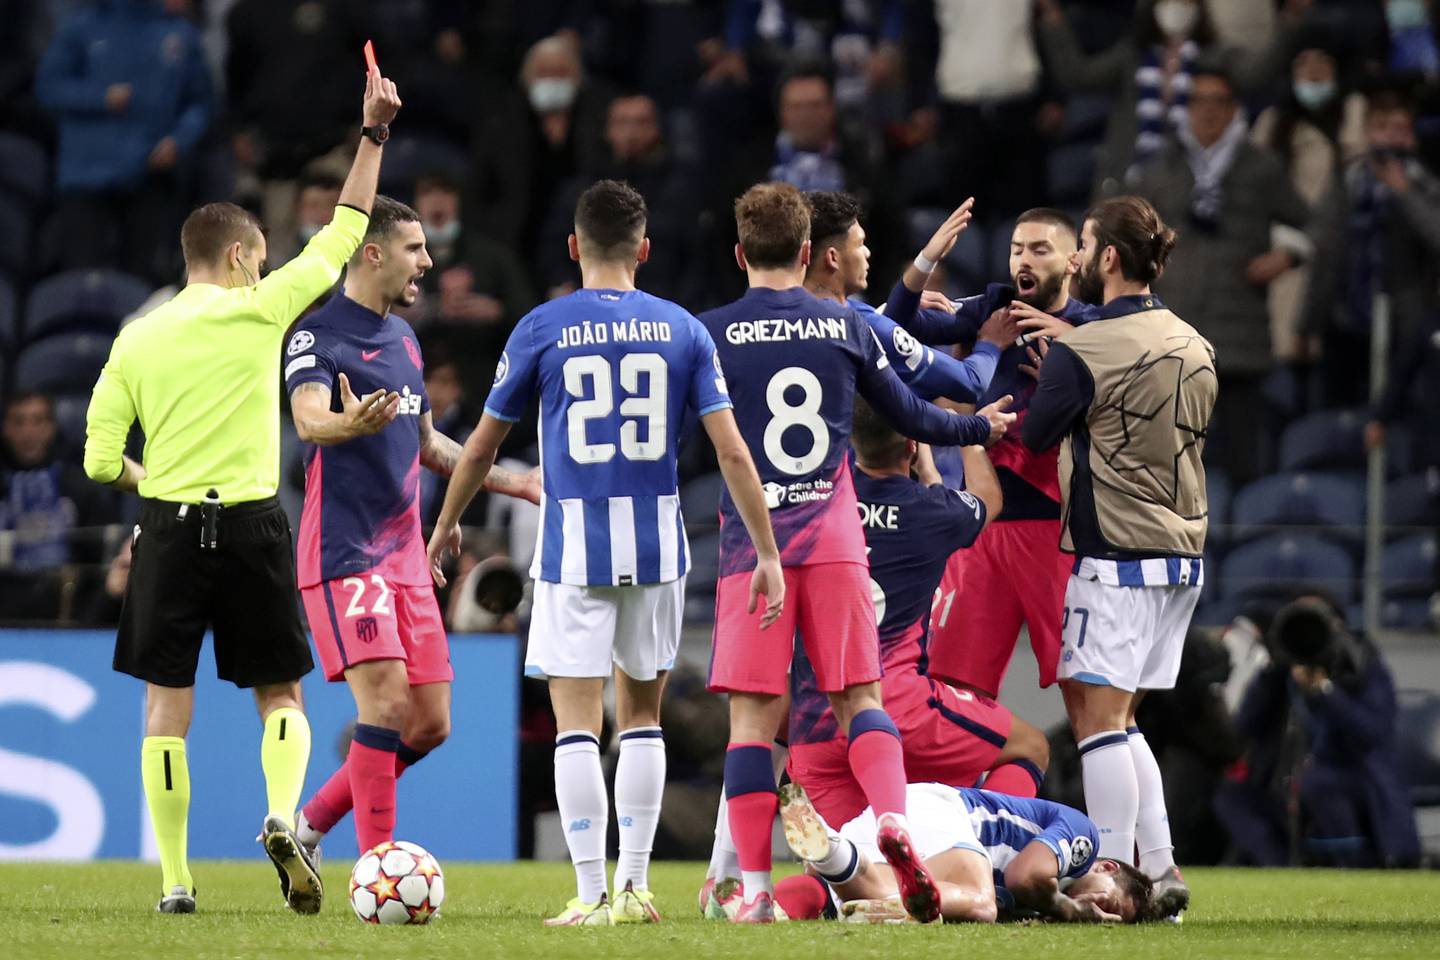 Referee Clement Turpin shows a red card to Atletico Madrid's Yannick Carrasco, second right, during the Champions League group match against Porto last season. AP